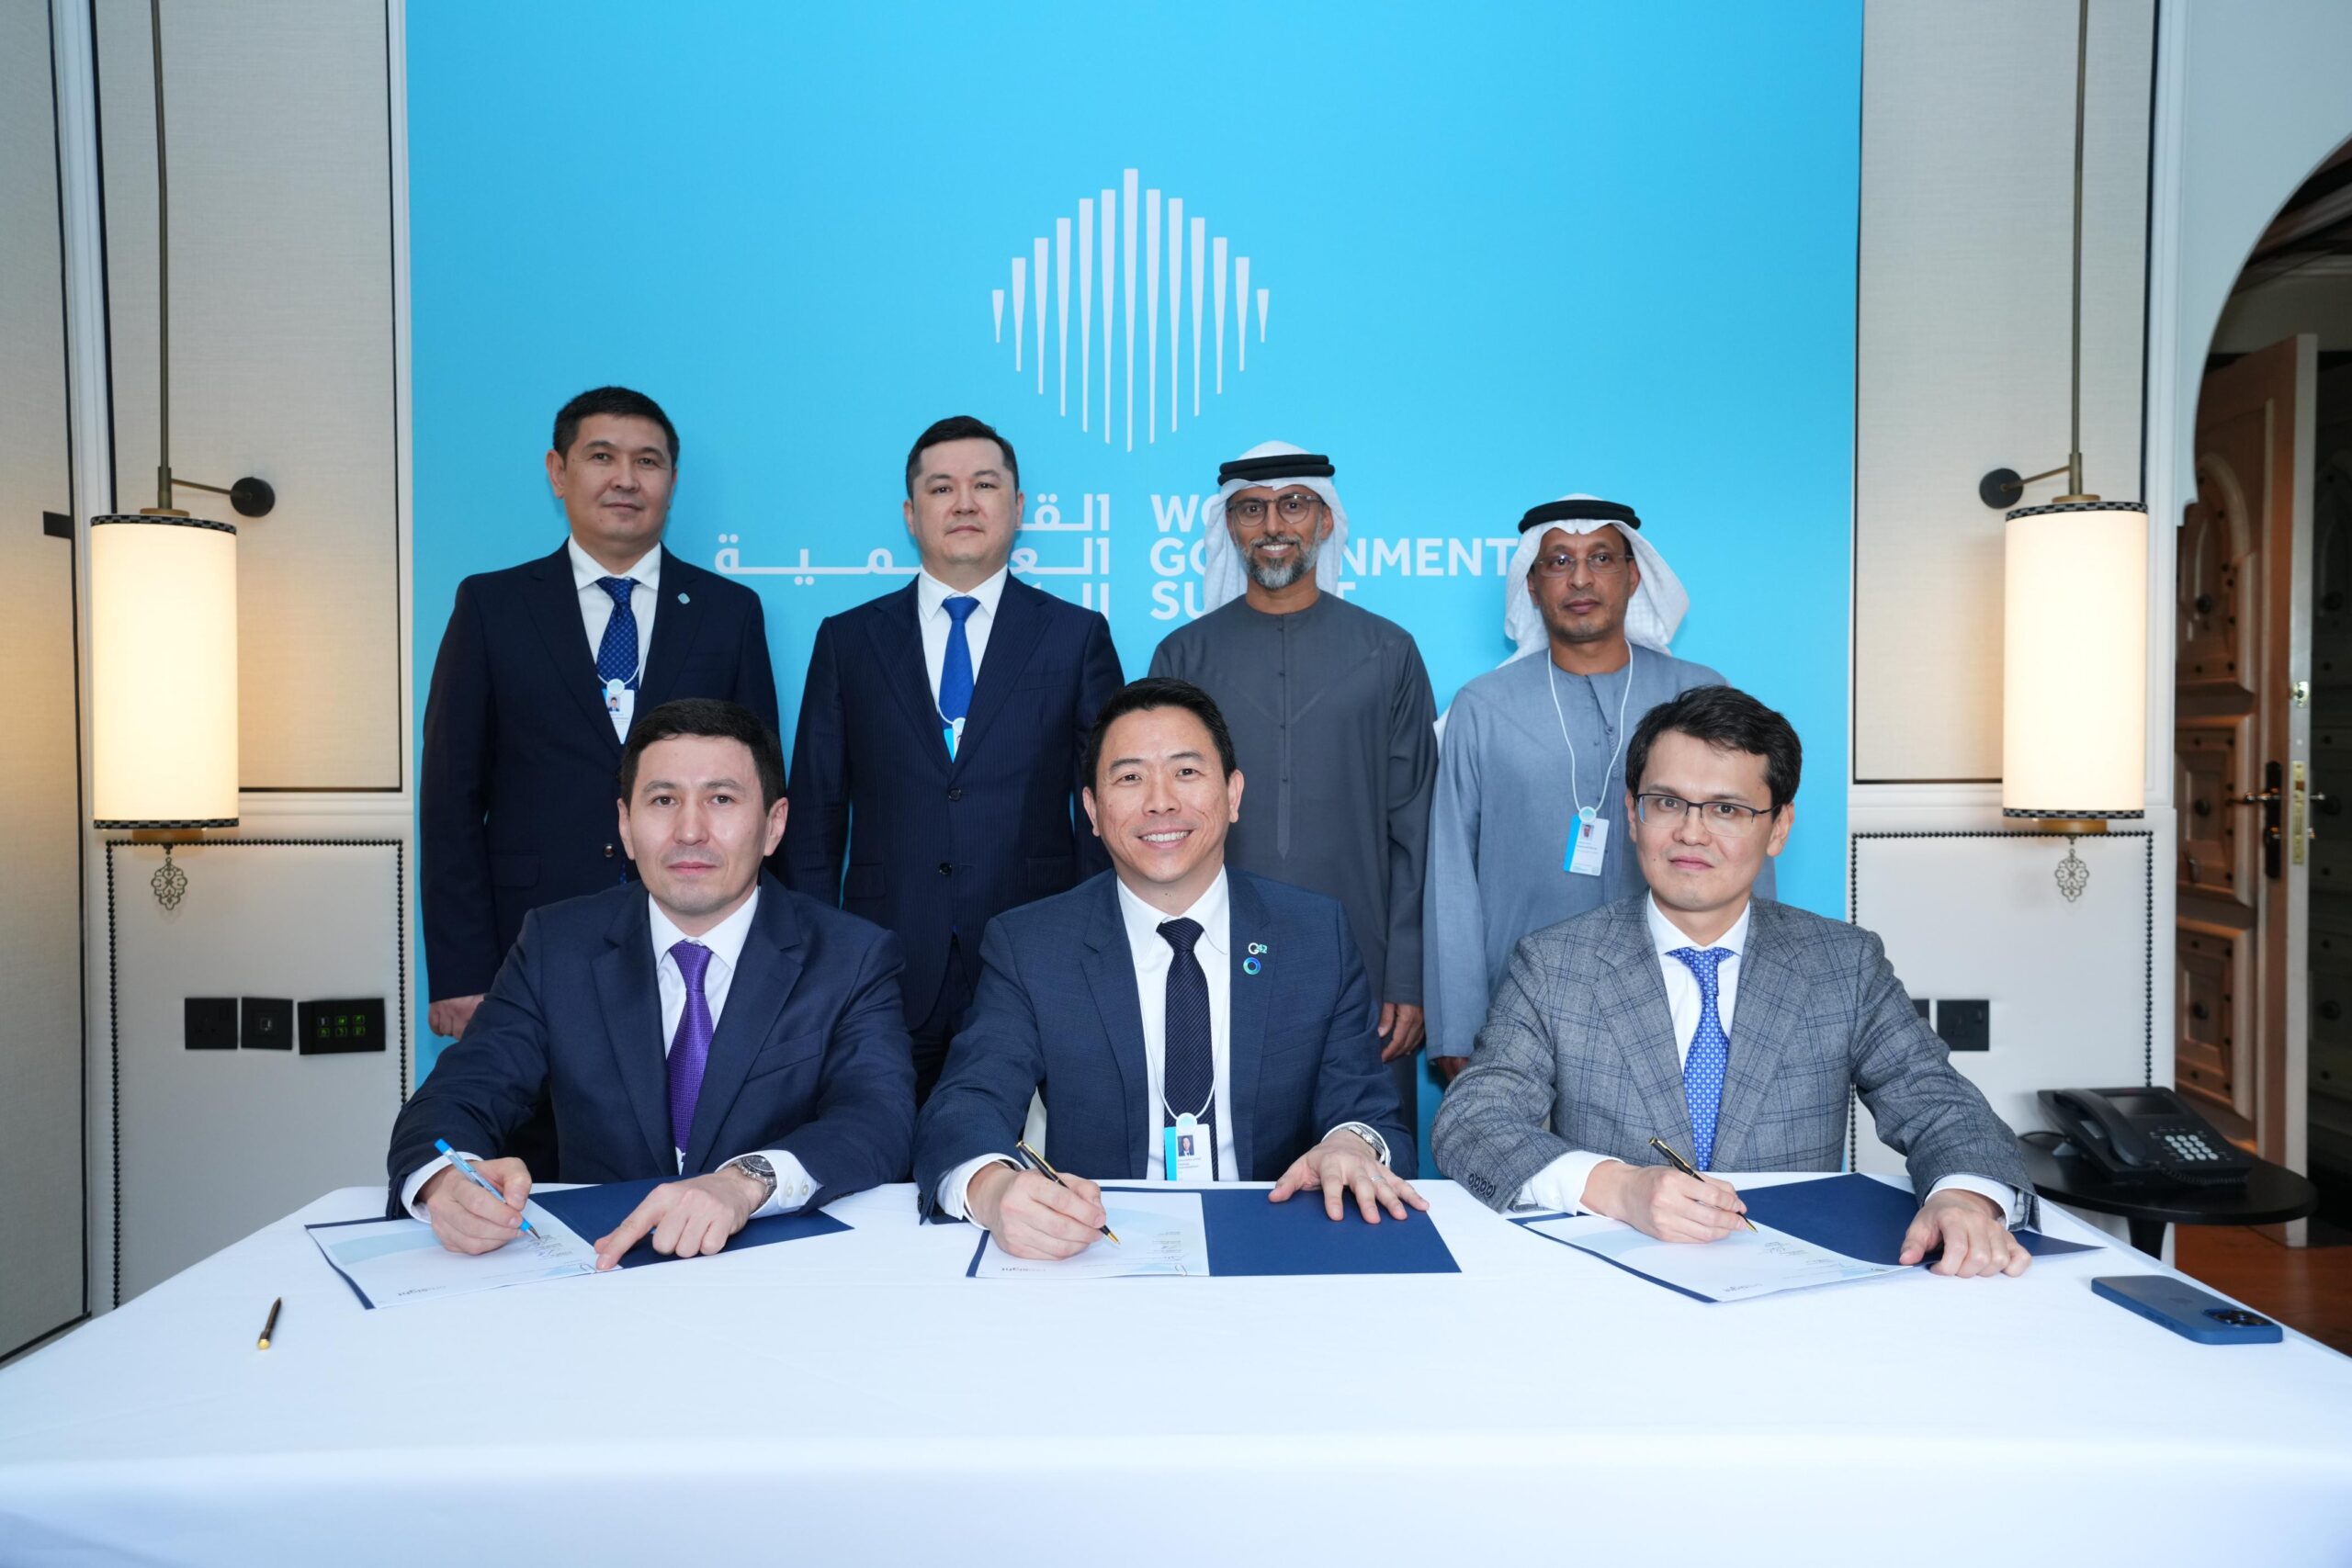 Kazakhstan Signs Agreement with Presight AI on Supercomputer Creation